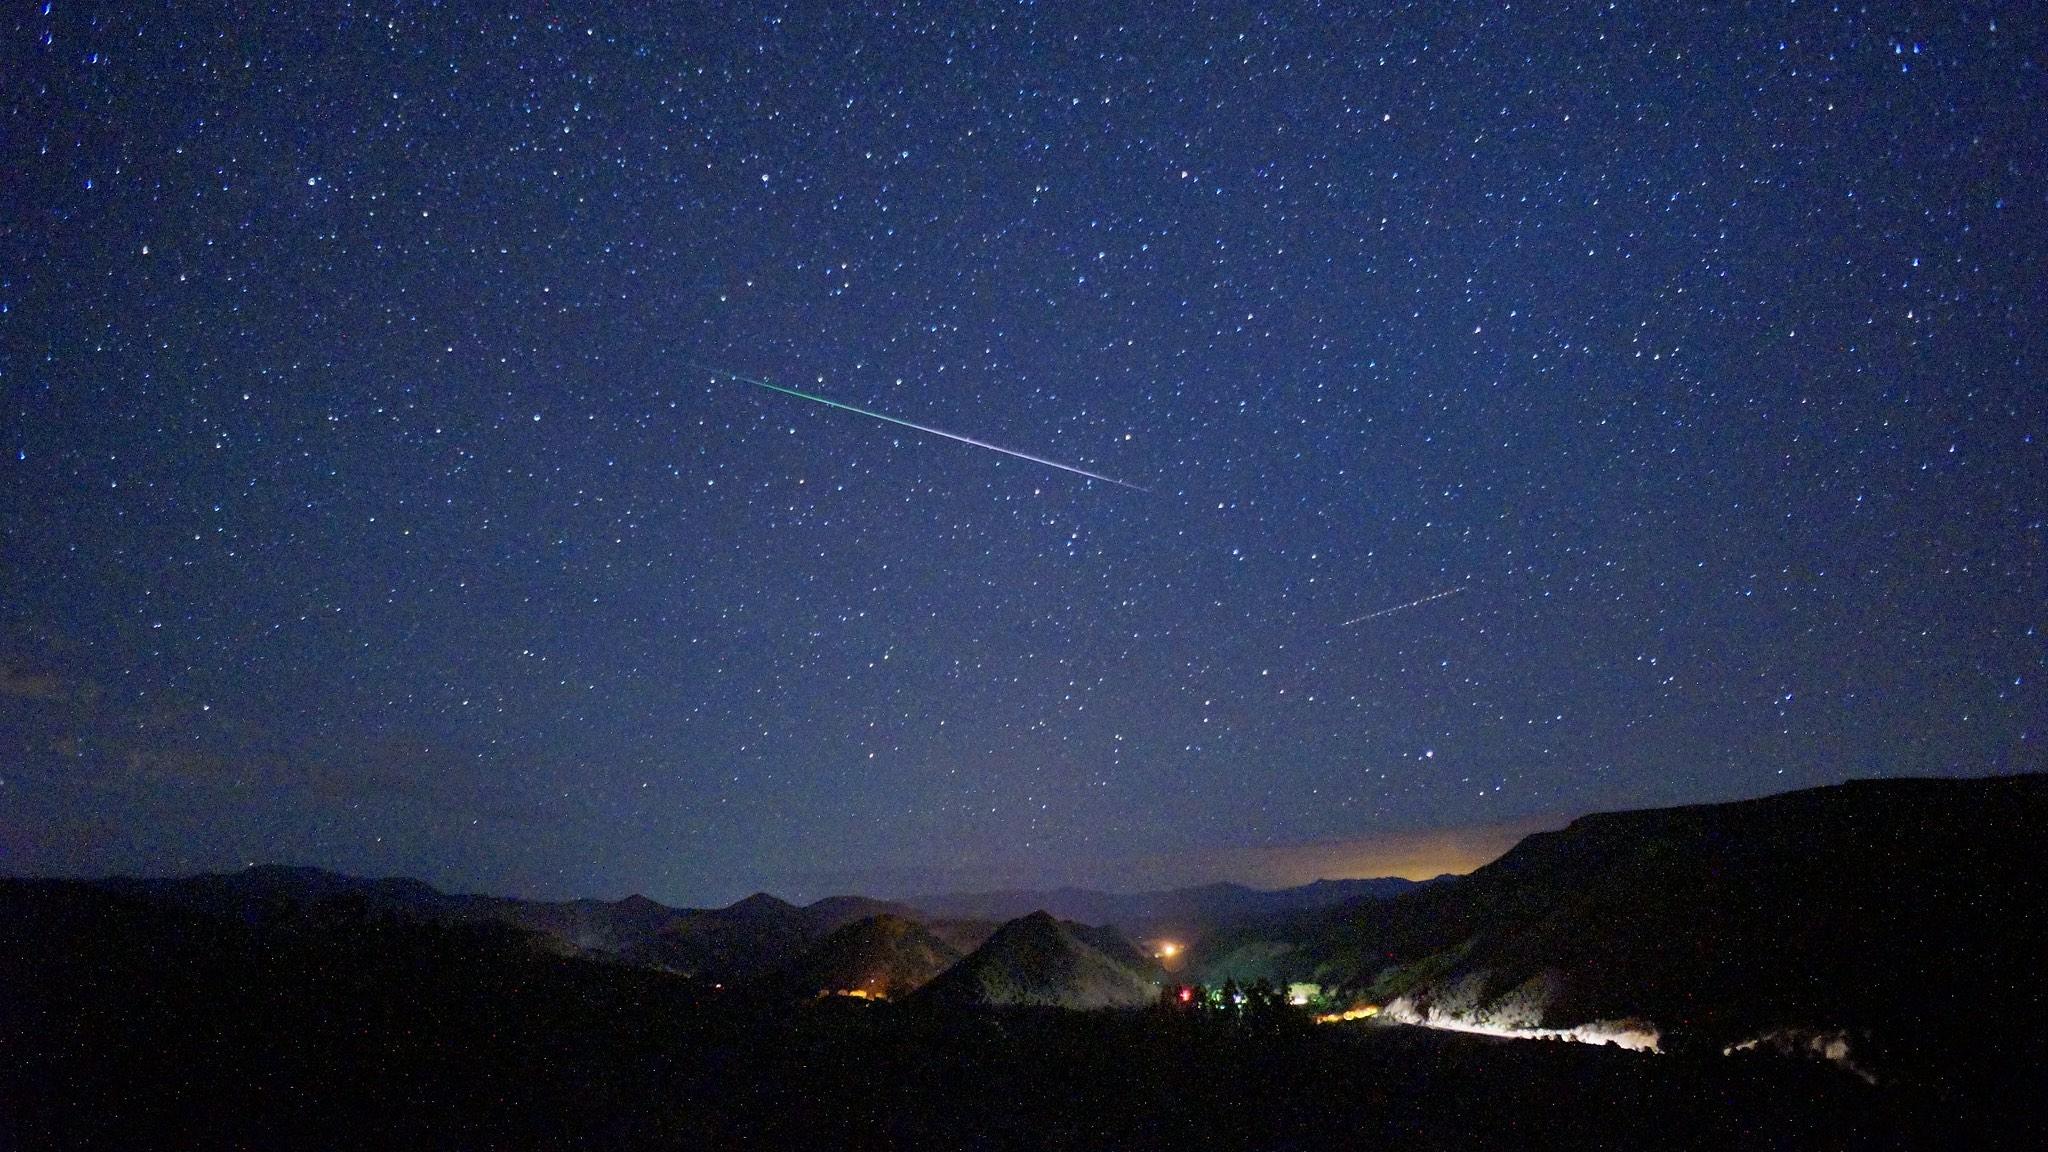 Perseid Meteor Shower Peaks Tuesday Night How to Catch the Best Views